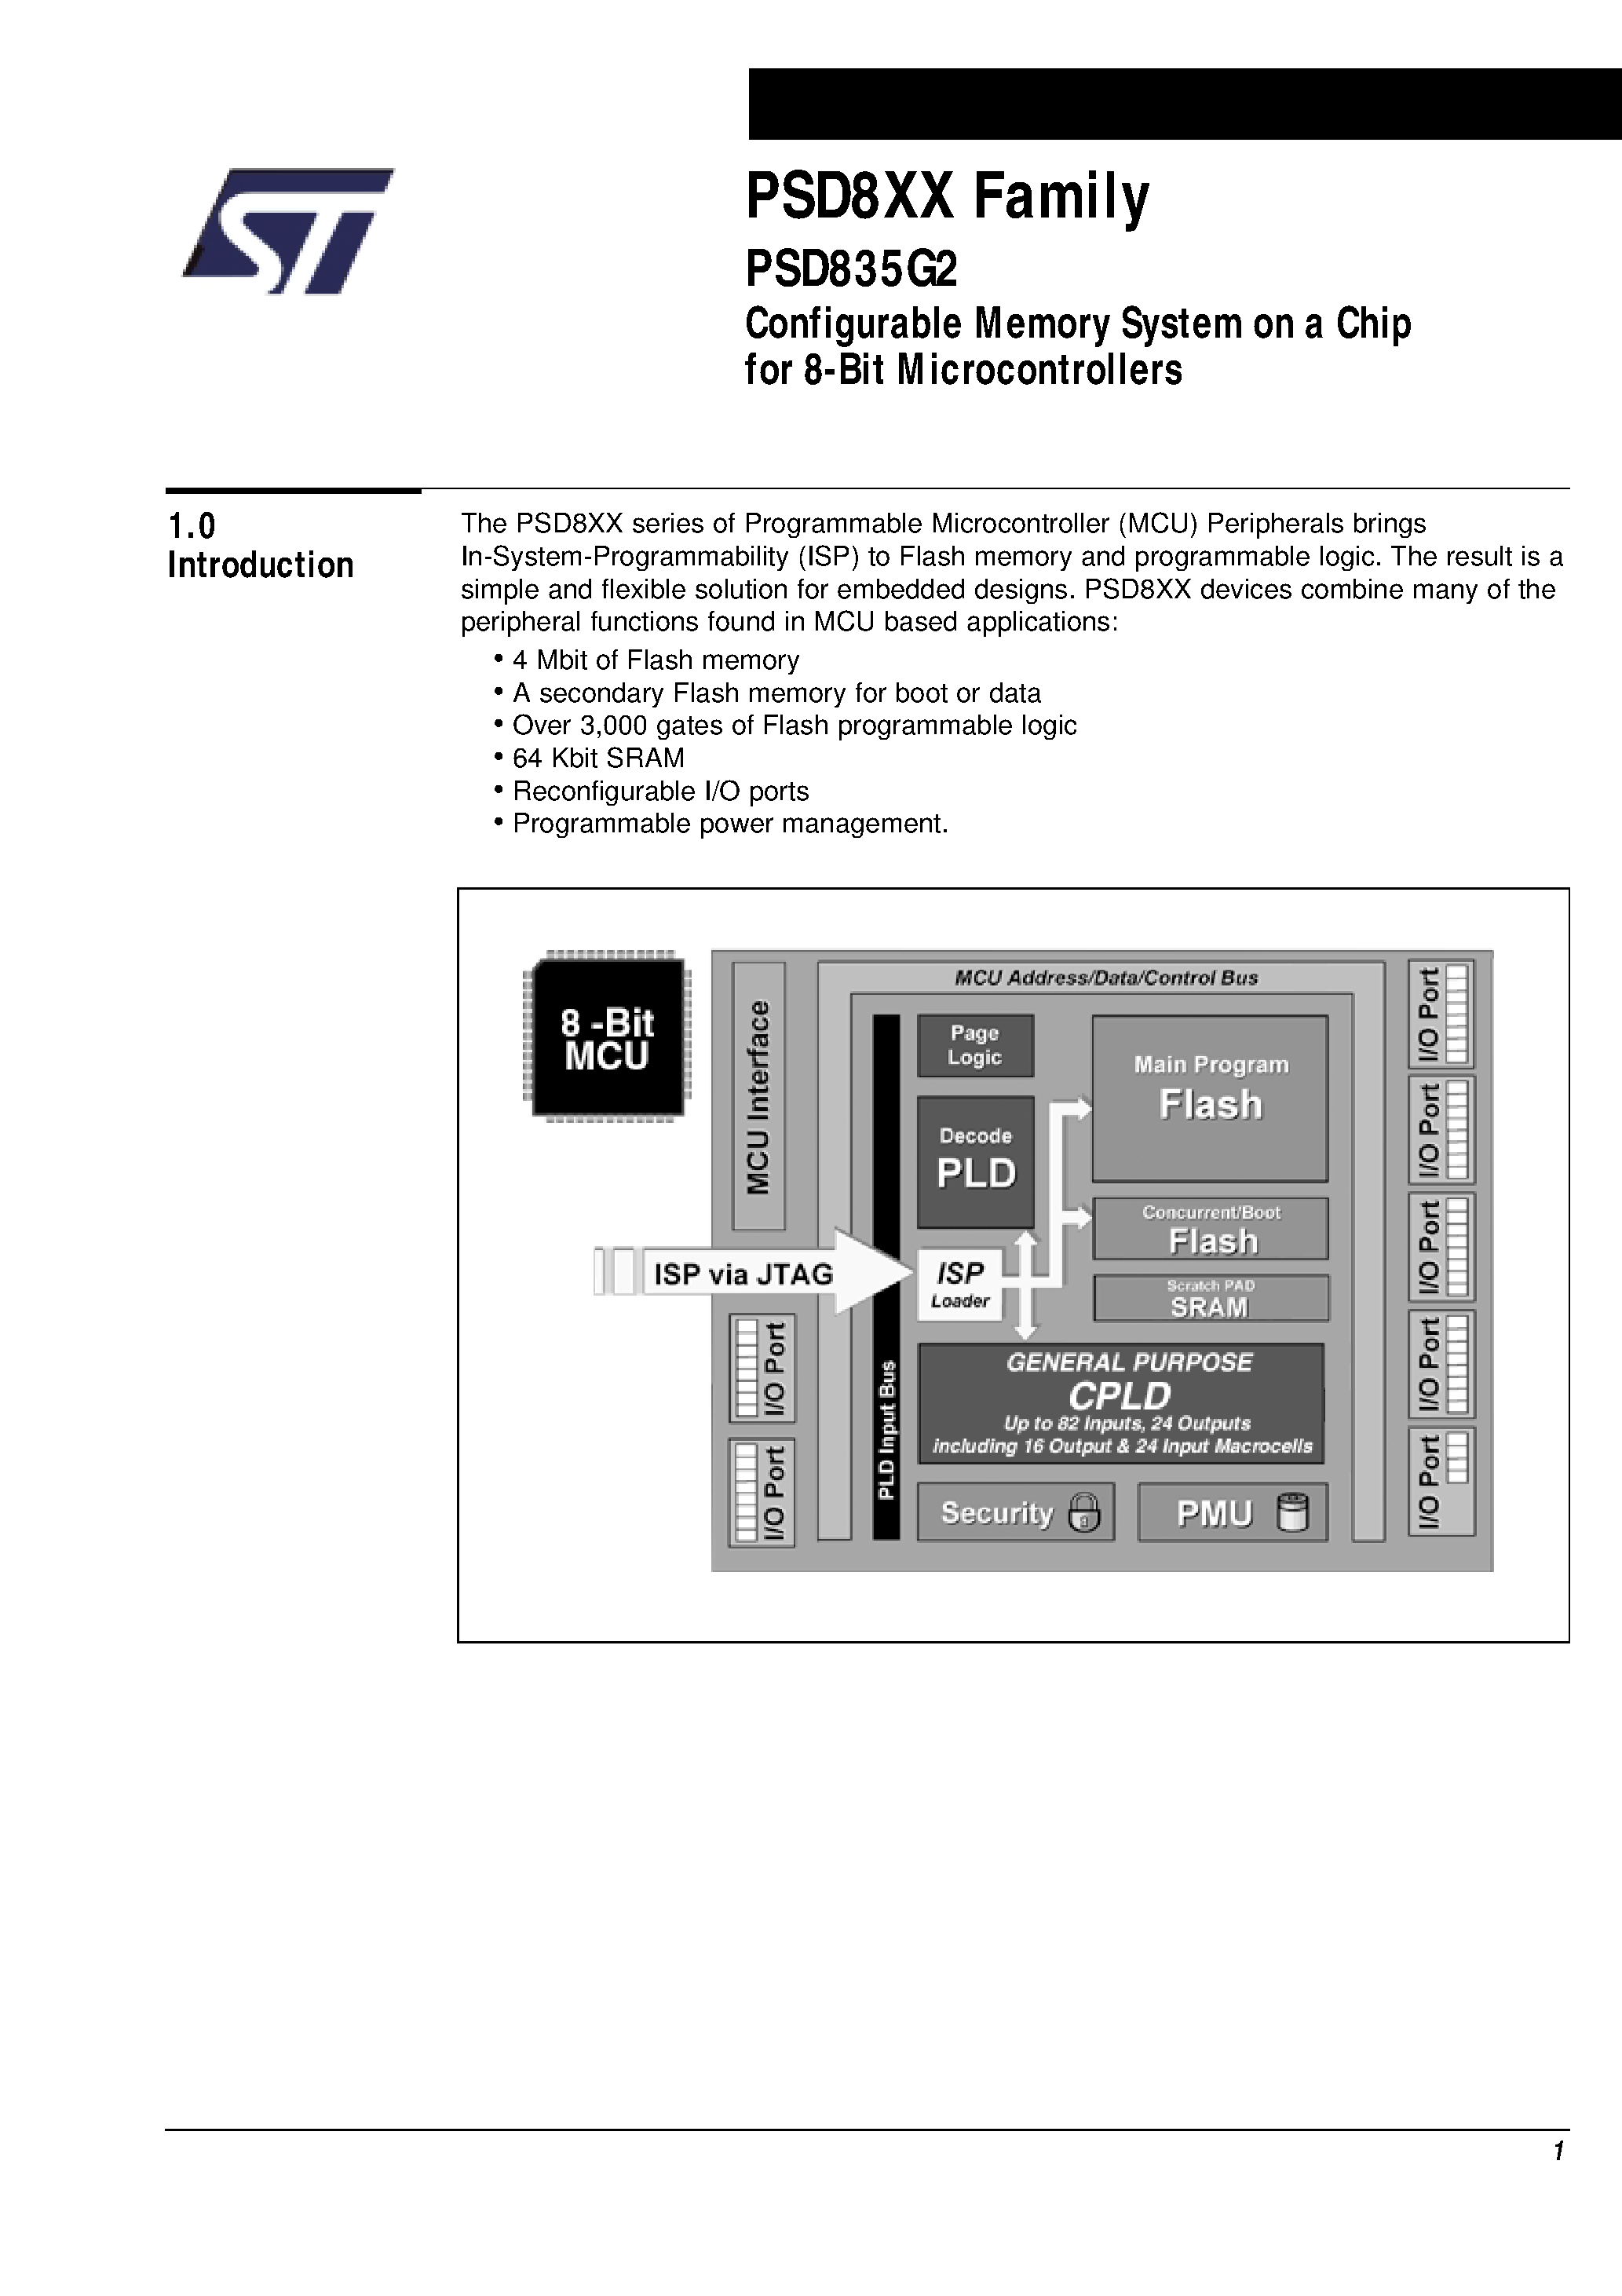 Datasheet PSD835F2-A-90B81 - Configurable Memory System on a Chip for 8-Bit Microcontrollers page 2